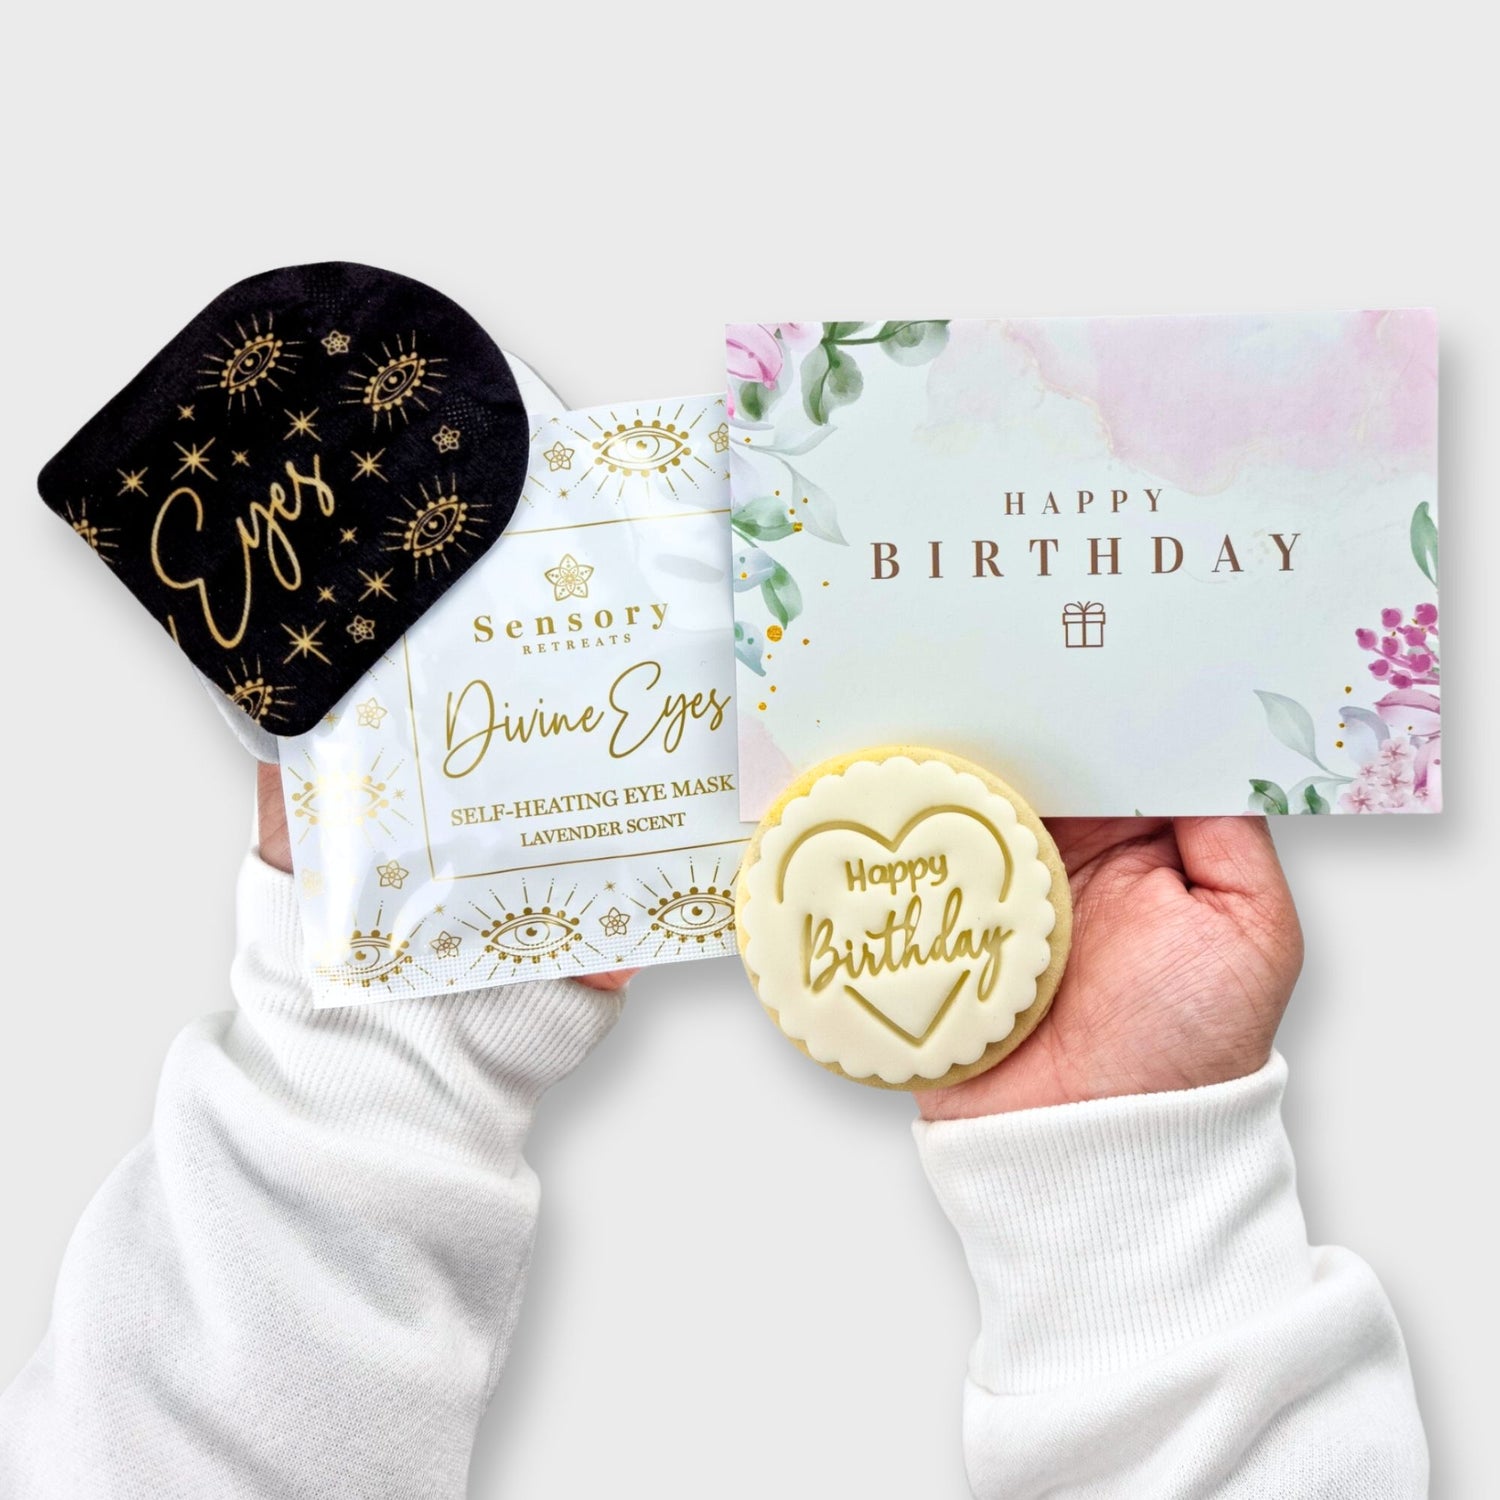 Mini birthday goft for her divine eye mask birthday card and happy birthday biscuit from heavenly boxes